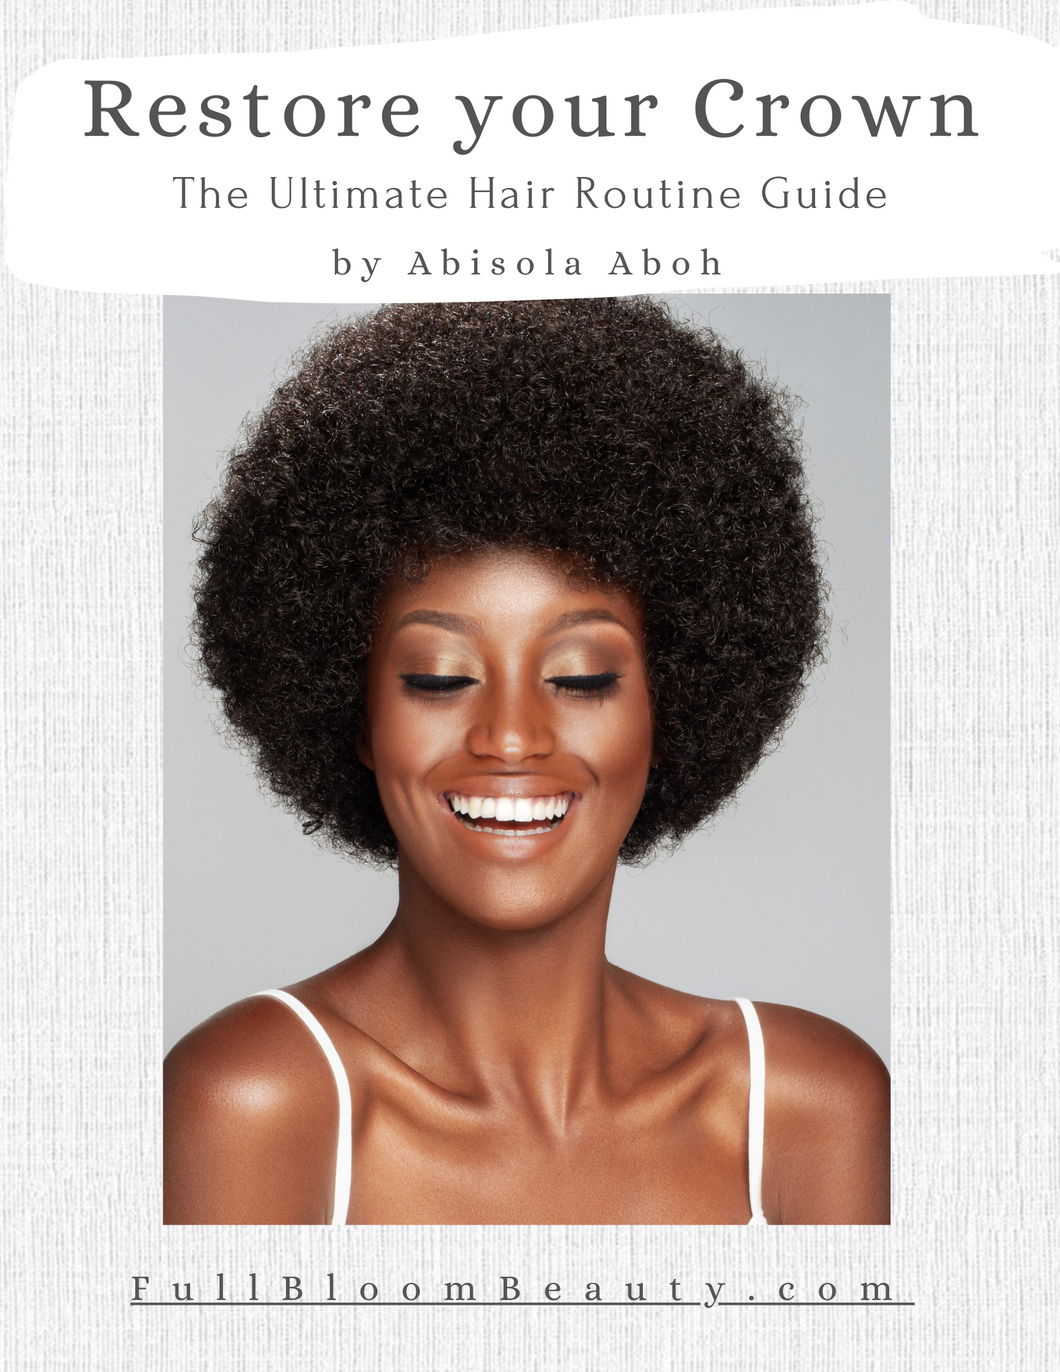 Ebook - Restore Your Crown: The Ultimate Hair Routine Guide